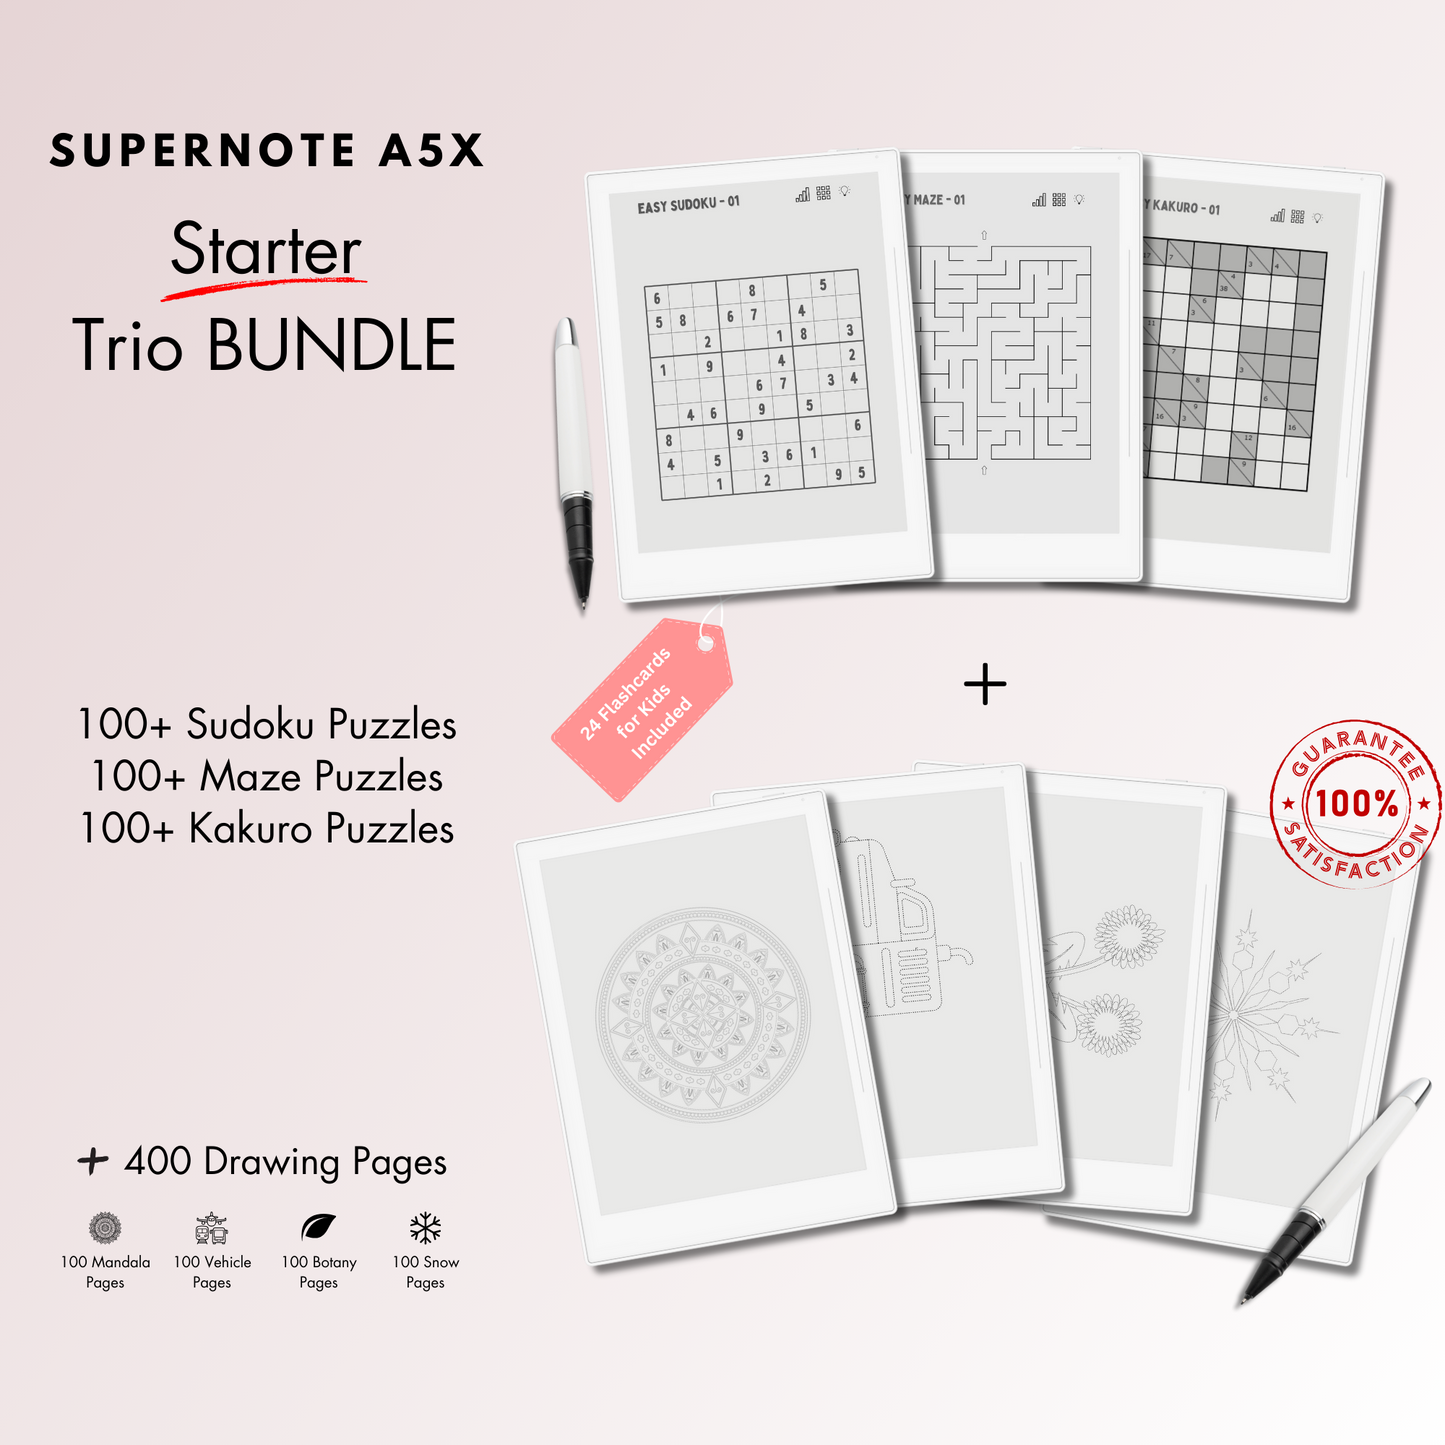 This is a Digital Bundle which includes Sudoku, Mazes and Kakuro Puzzles tailored for Supernote A5X and A6X.